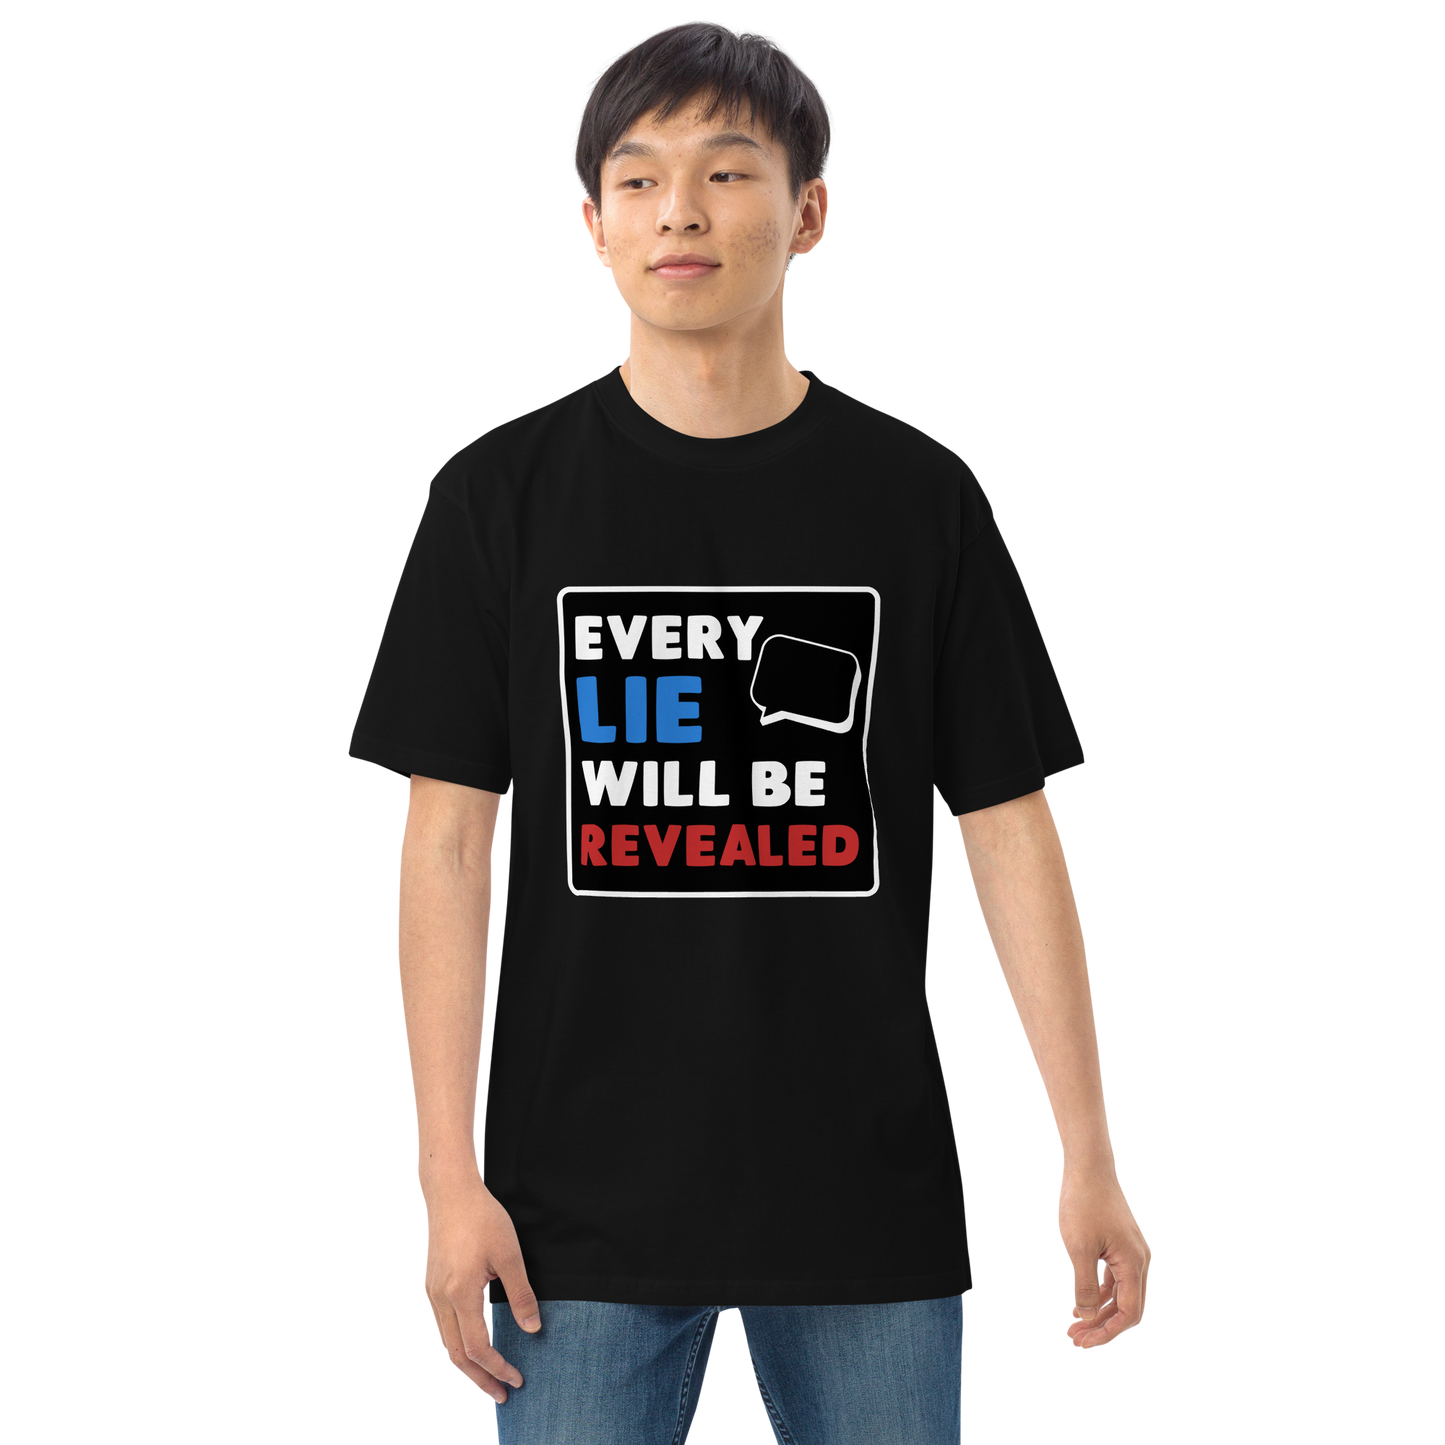 Every Lie Will Be Revealed Shirt